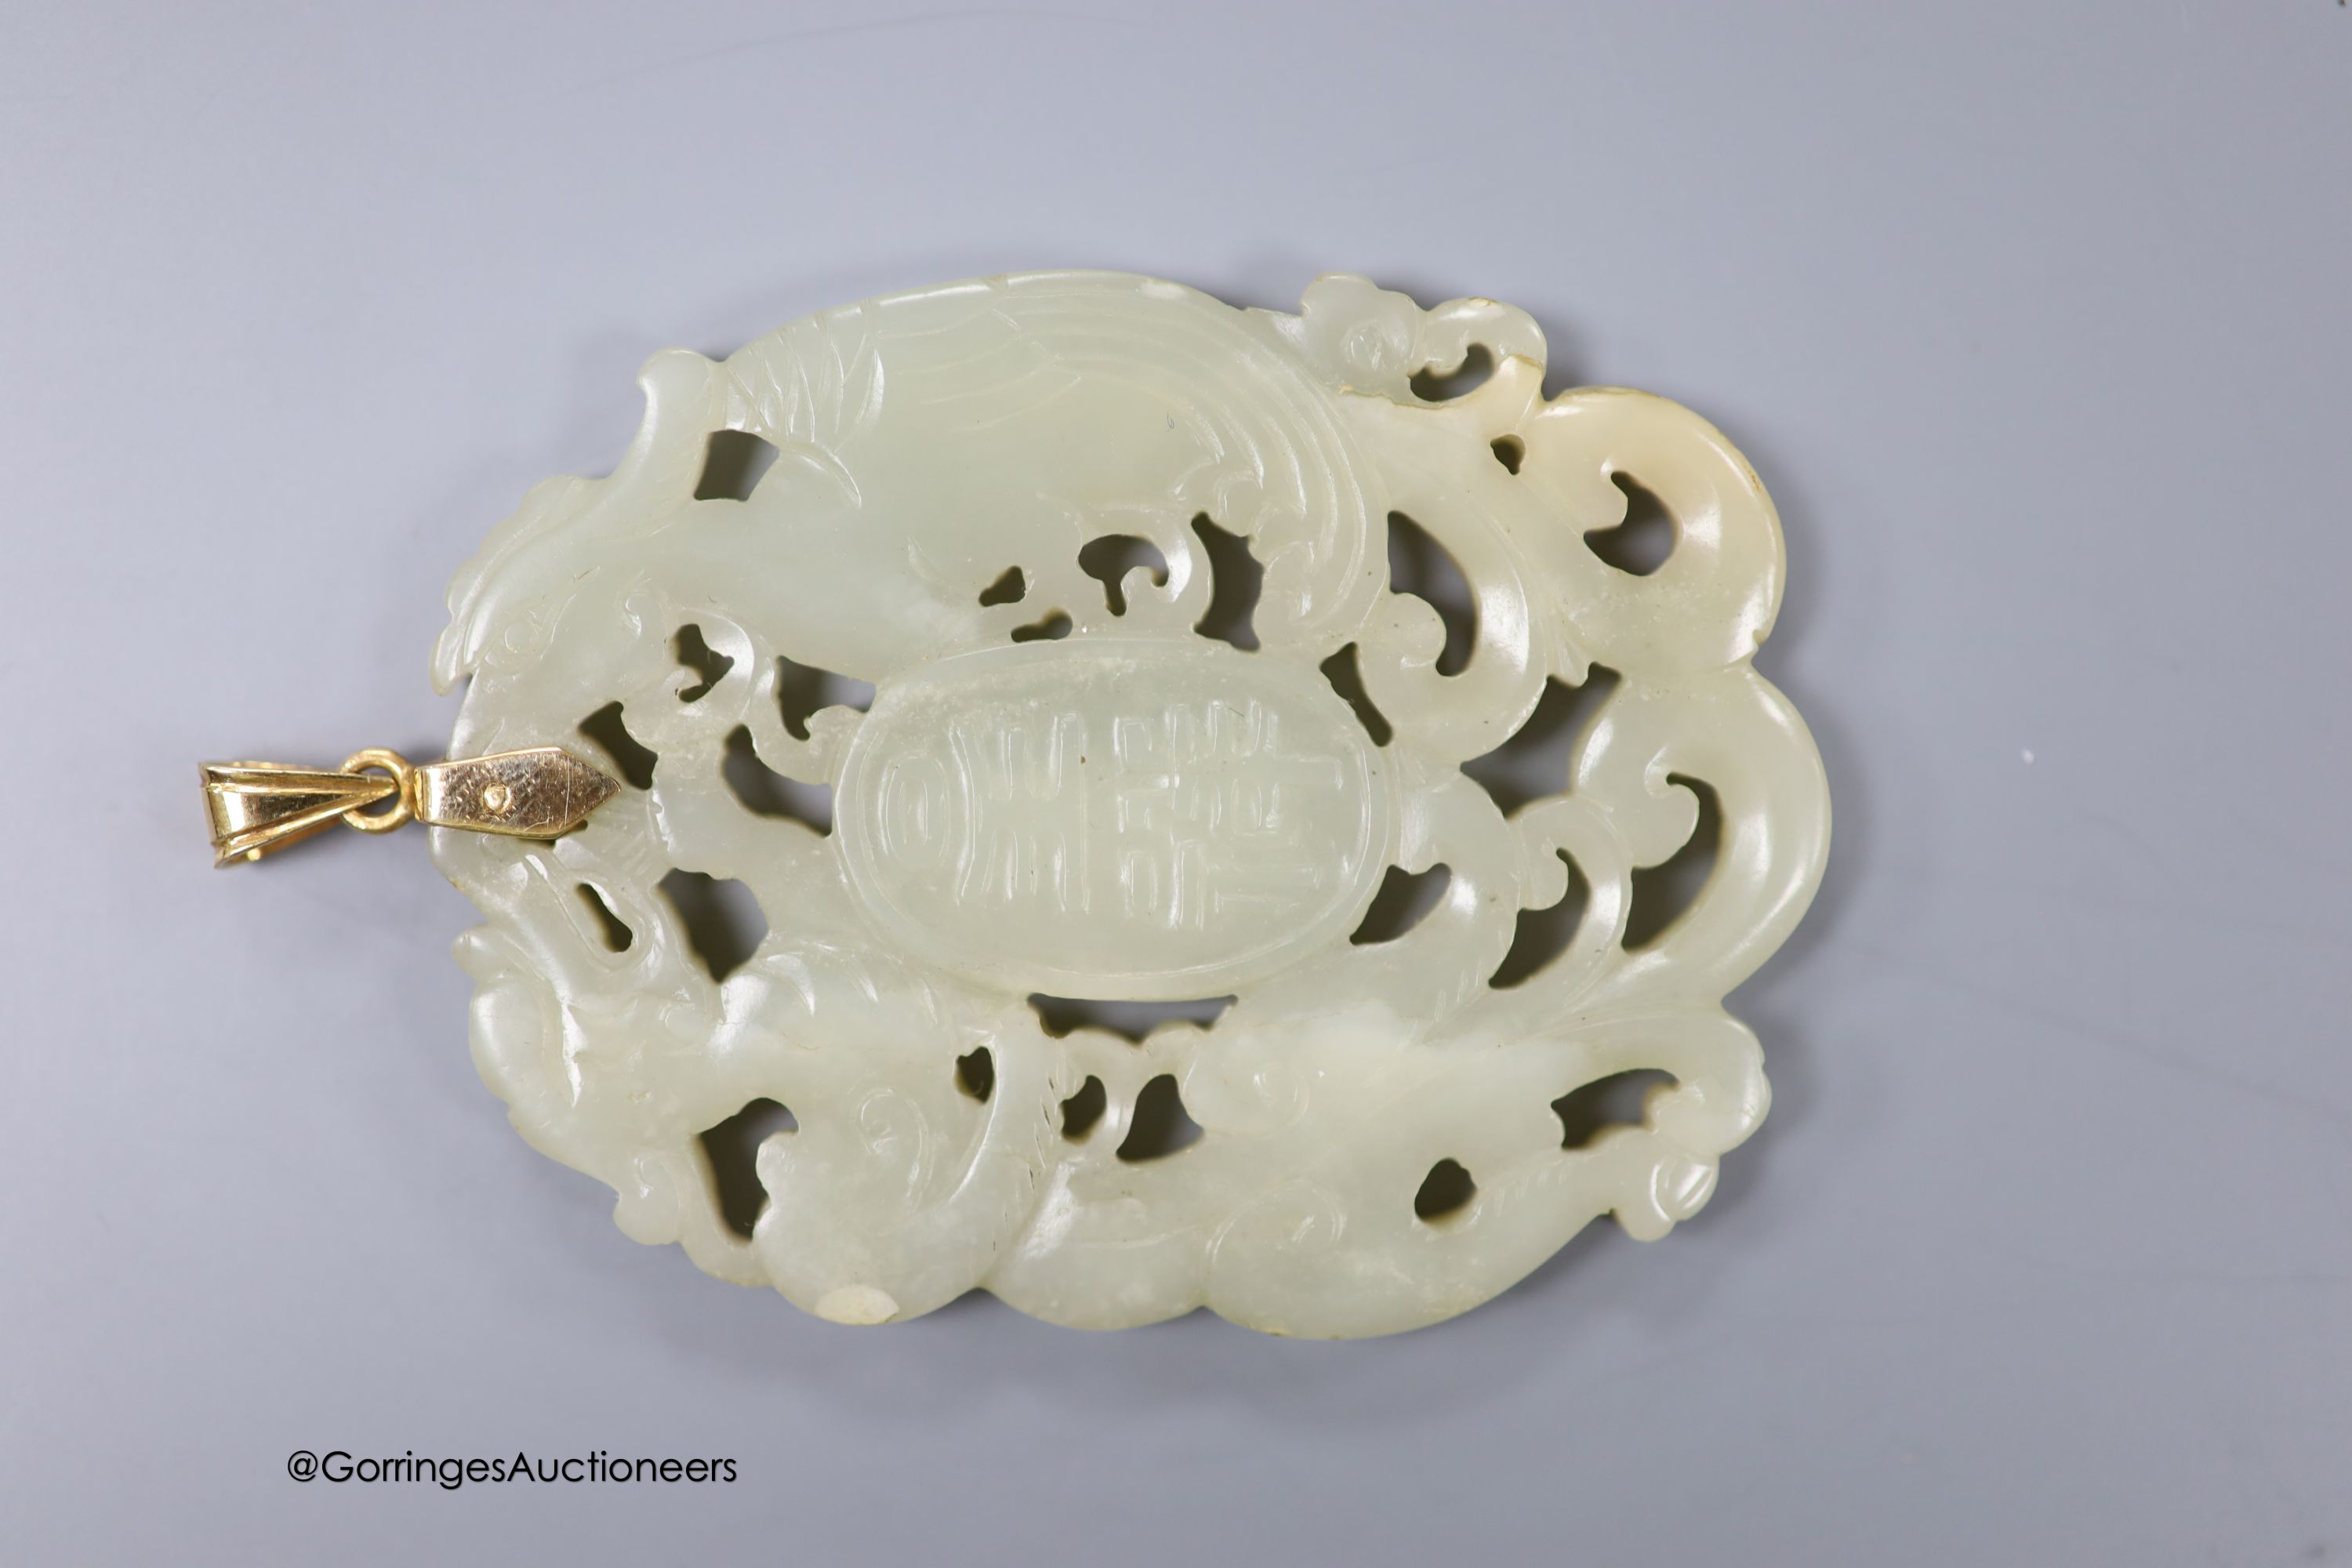 A Chinese yellow metal amounted jade pendant, 63mm, carved with dragons and character marks.